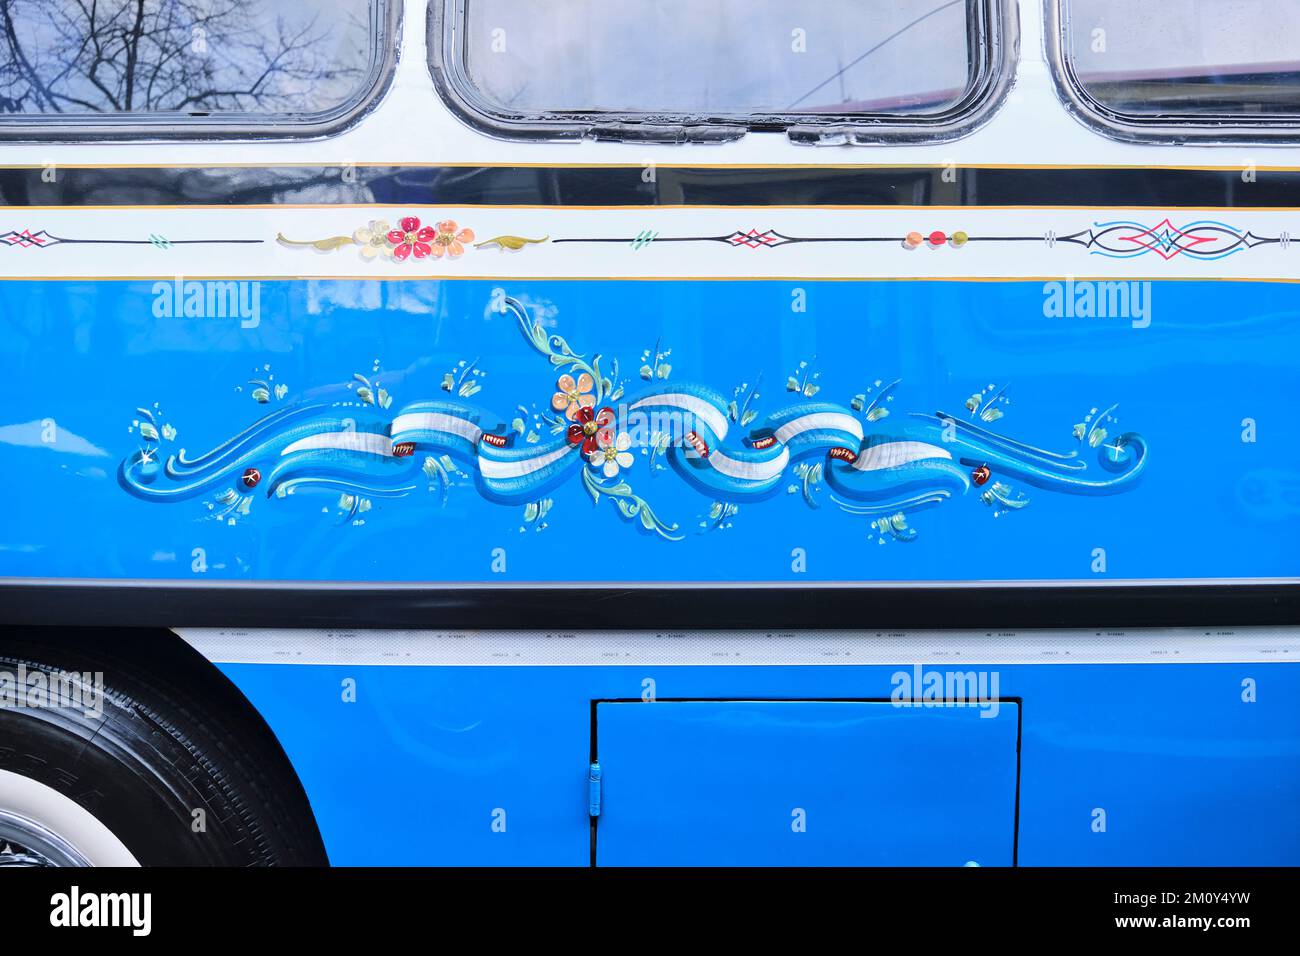 Buenos Aires, Argentina, June 20, 2022: Side of a restored classic Mercedes Benz bus painted with ornaments, flag ribbons and flowers, in the filetead Stock Photo